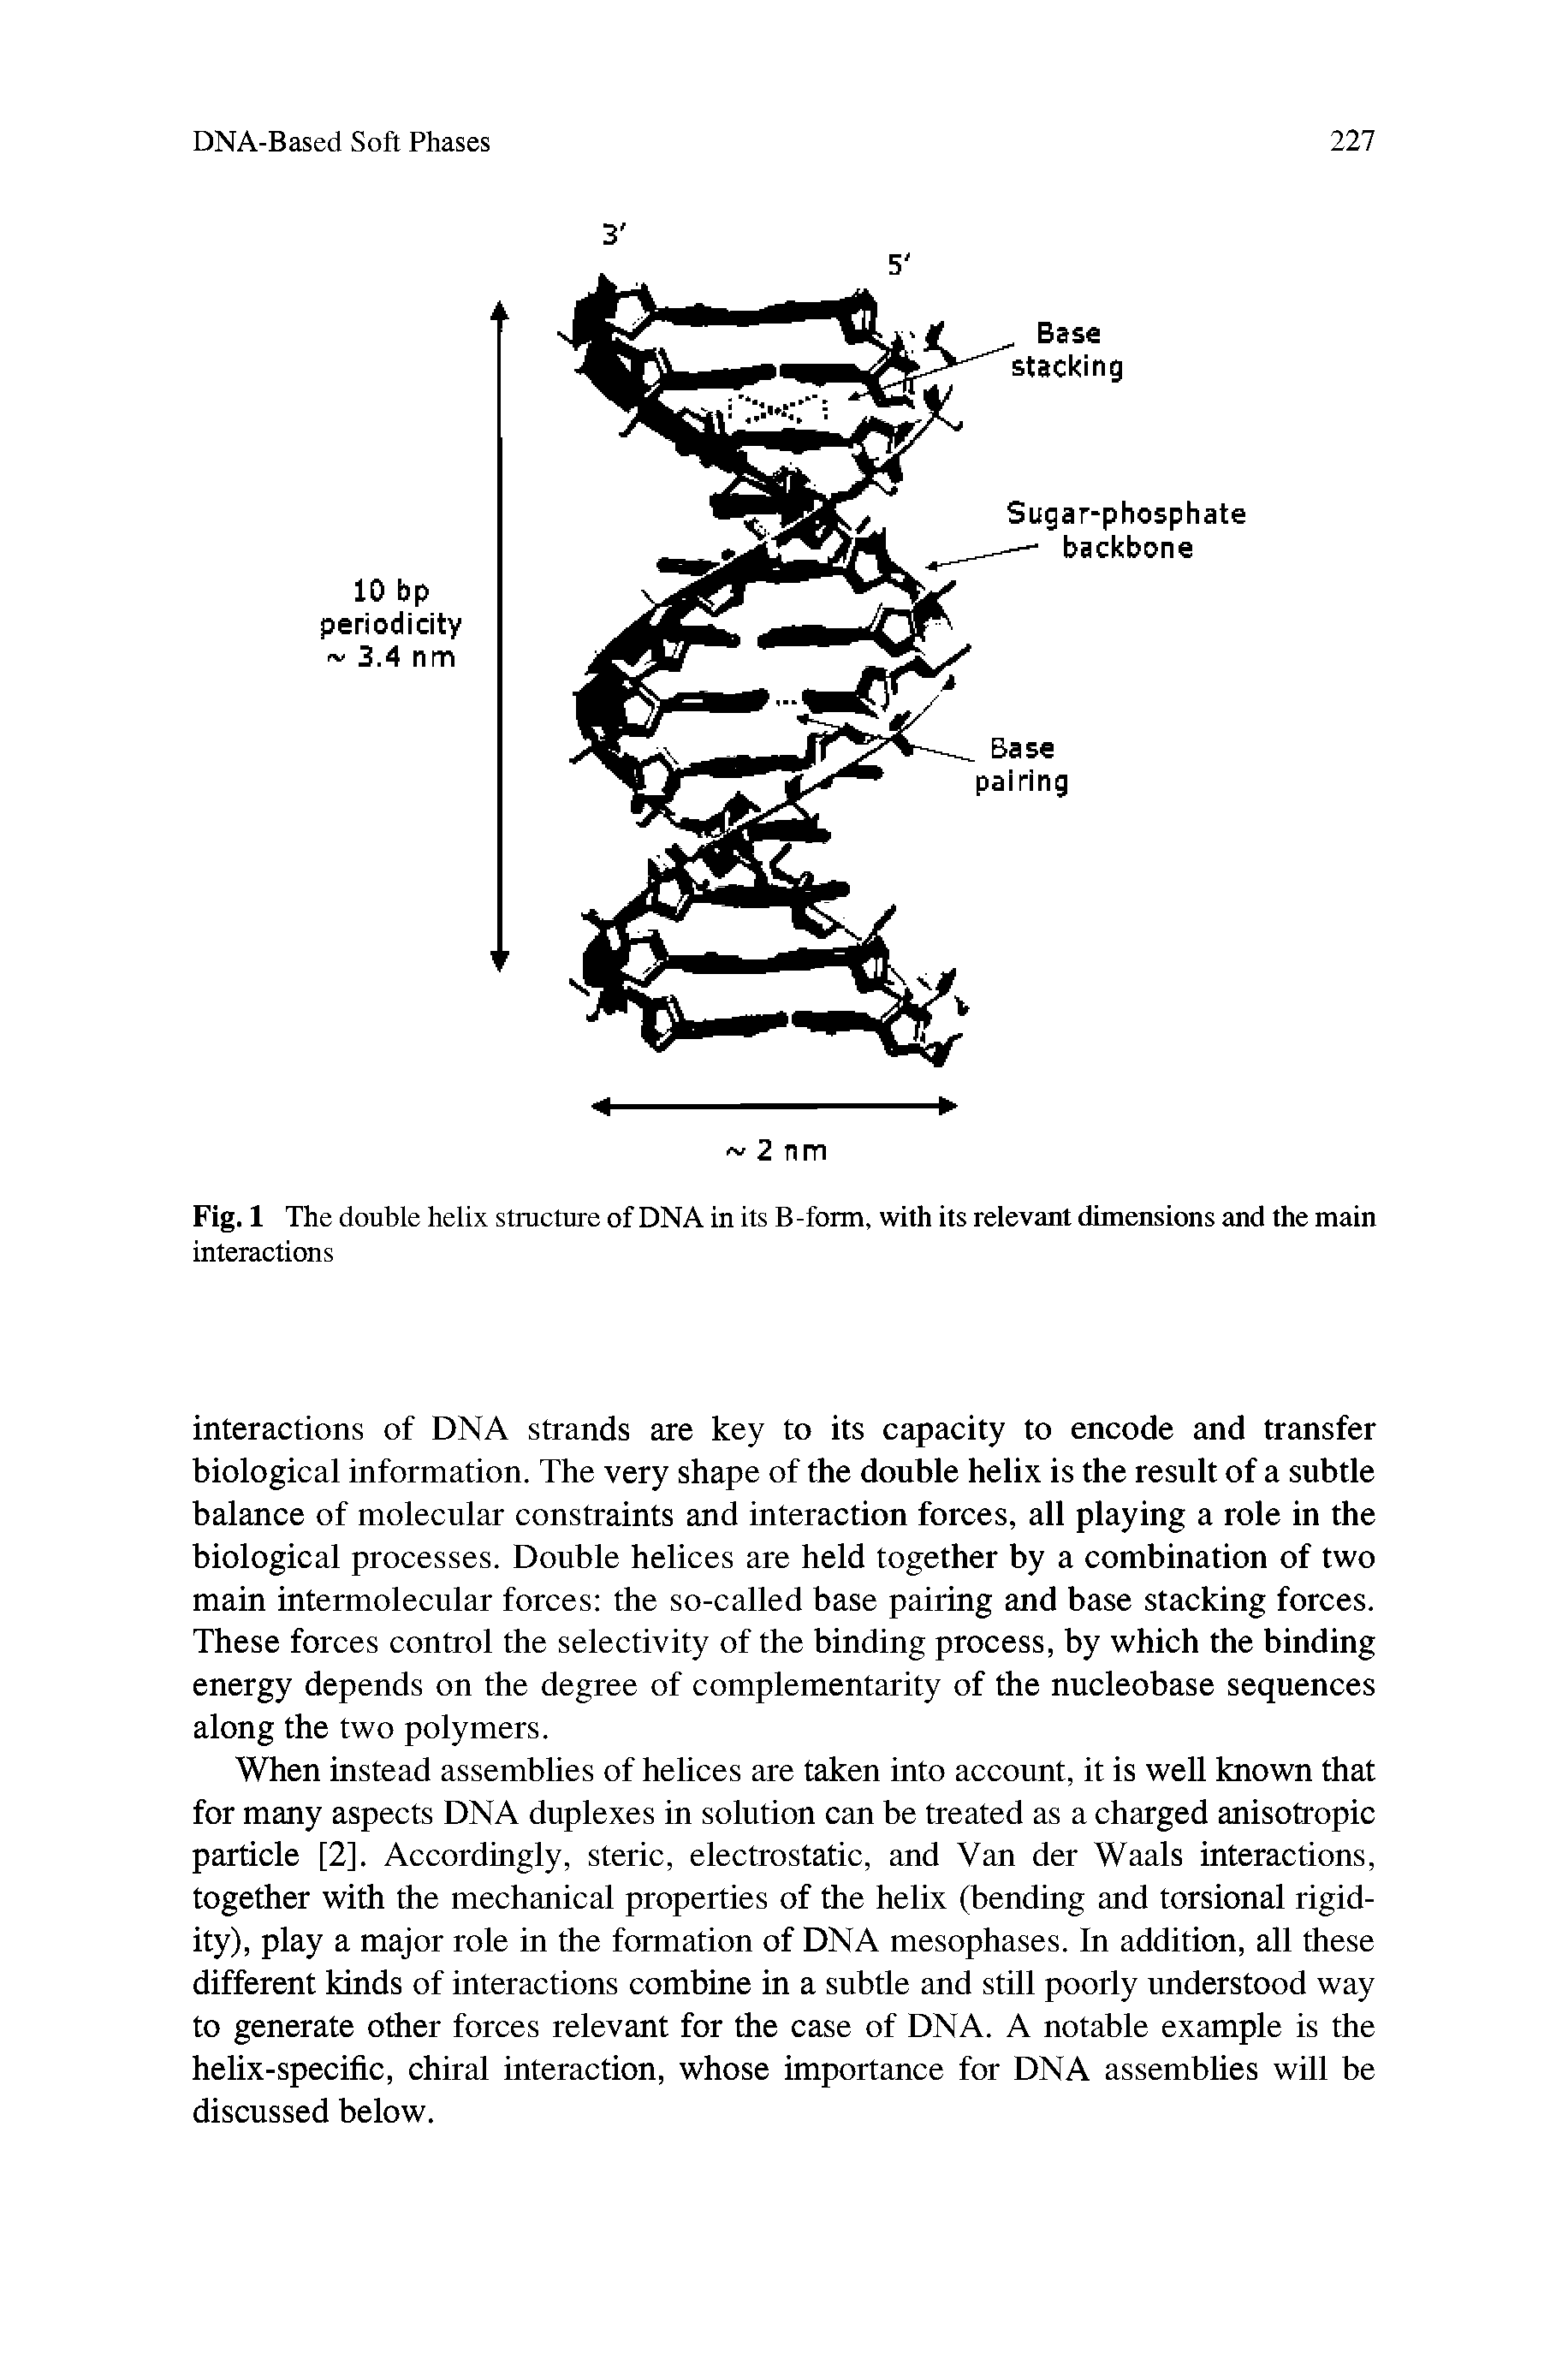 Fig. 1 The double helix structure of DNA in its B -form, with its relevant dimensions and the main interactions...